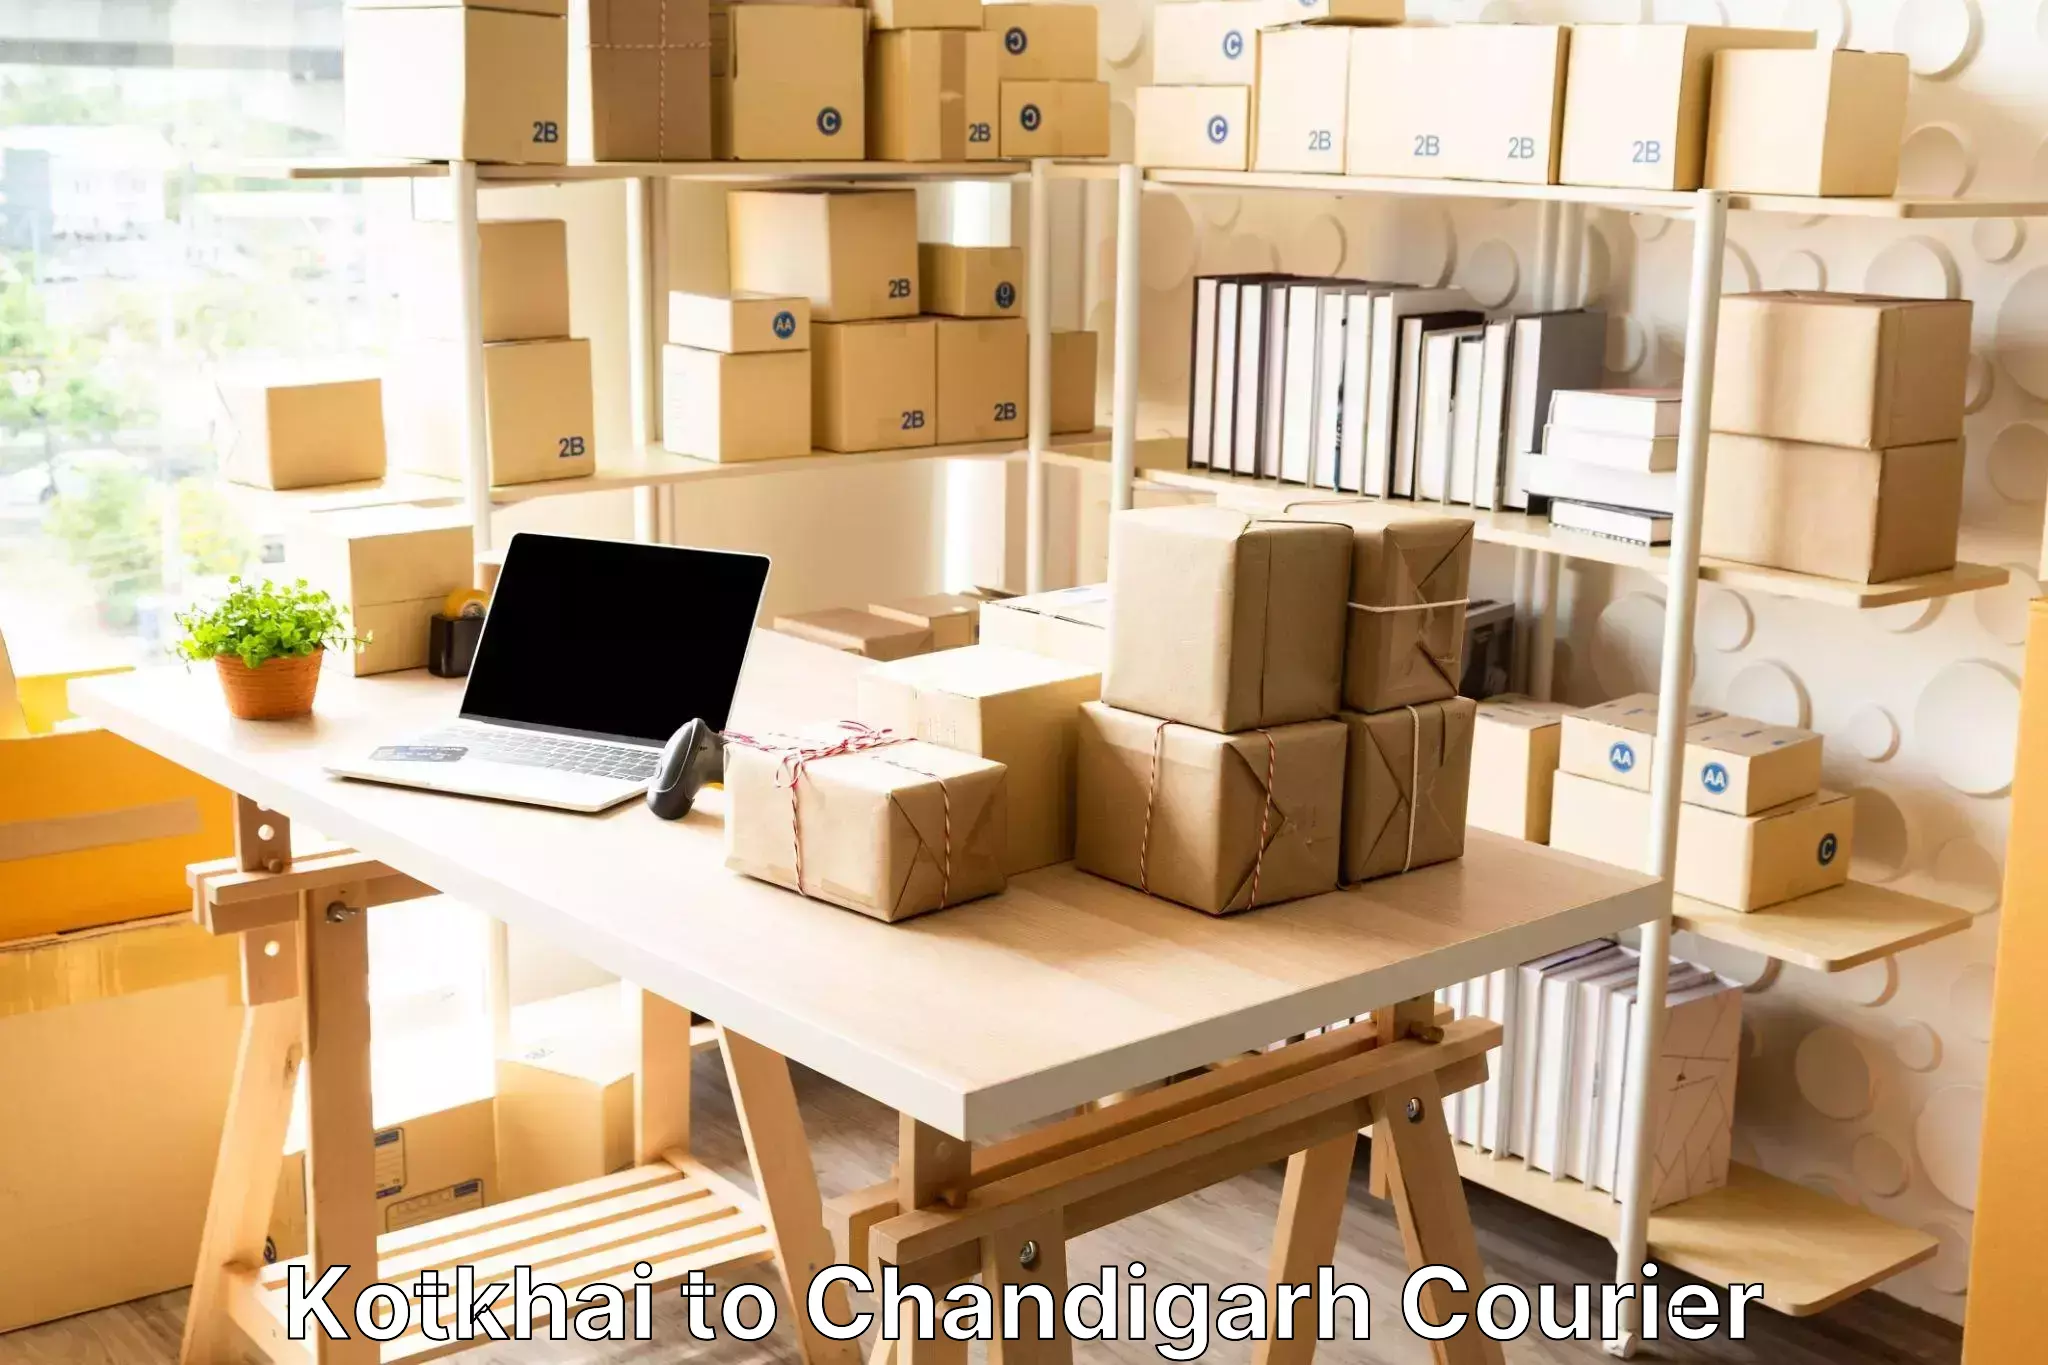 Online luggage shipping booking Kotkhai to Chandigarh